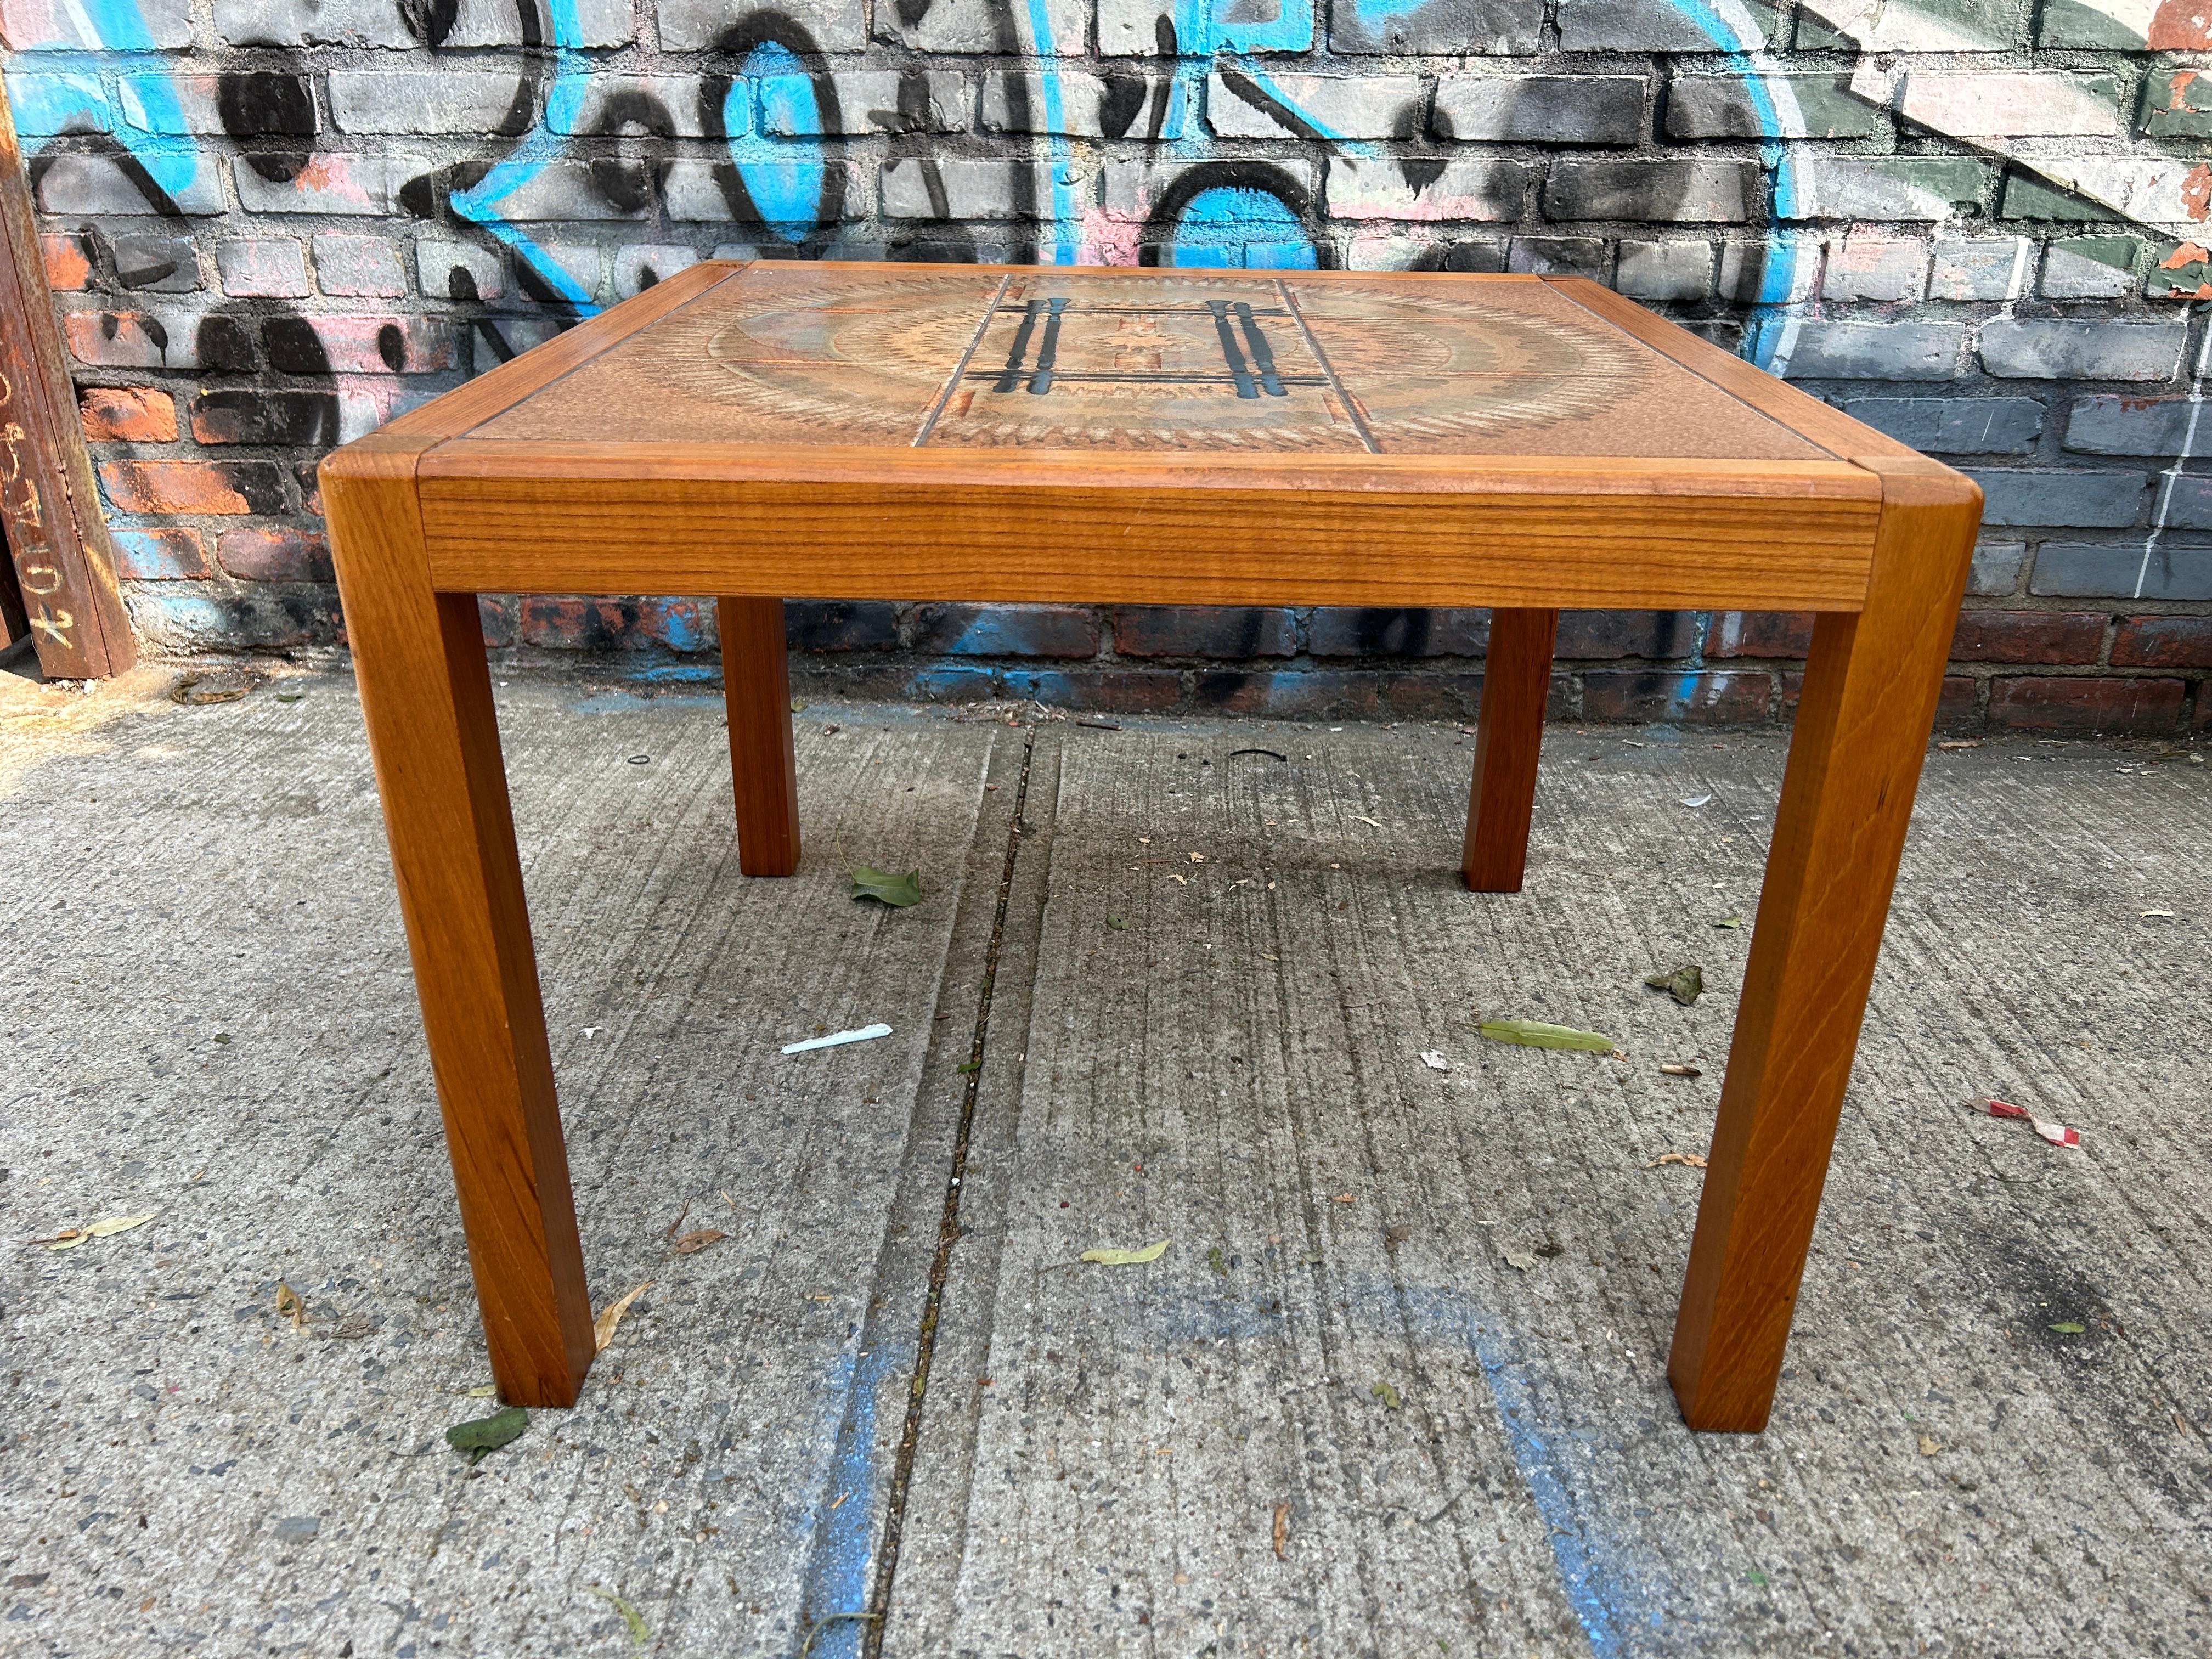 Beautiful Midcentury Danish modern teak and ceramic tile coffee or side table by Nordisk Andels-Eksport. Great simple design and great vintage condition - clean inside and out. Beautiful Scandinavian inlaid tiles on top surface. Made in Denmark -